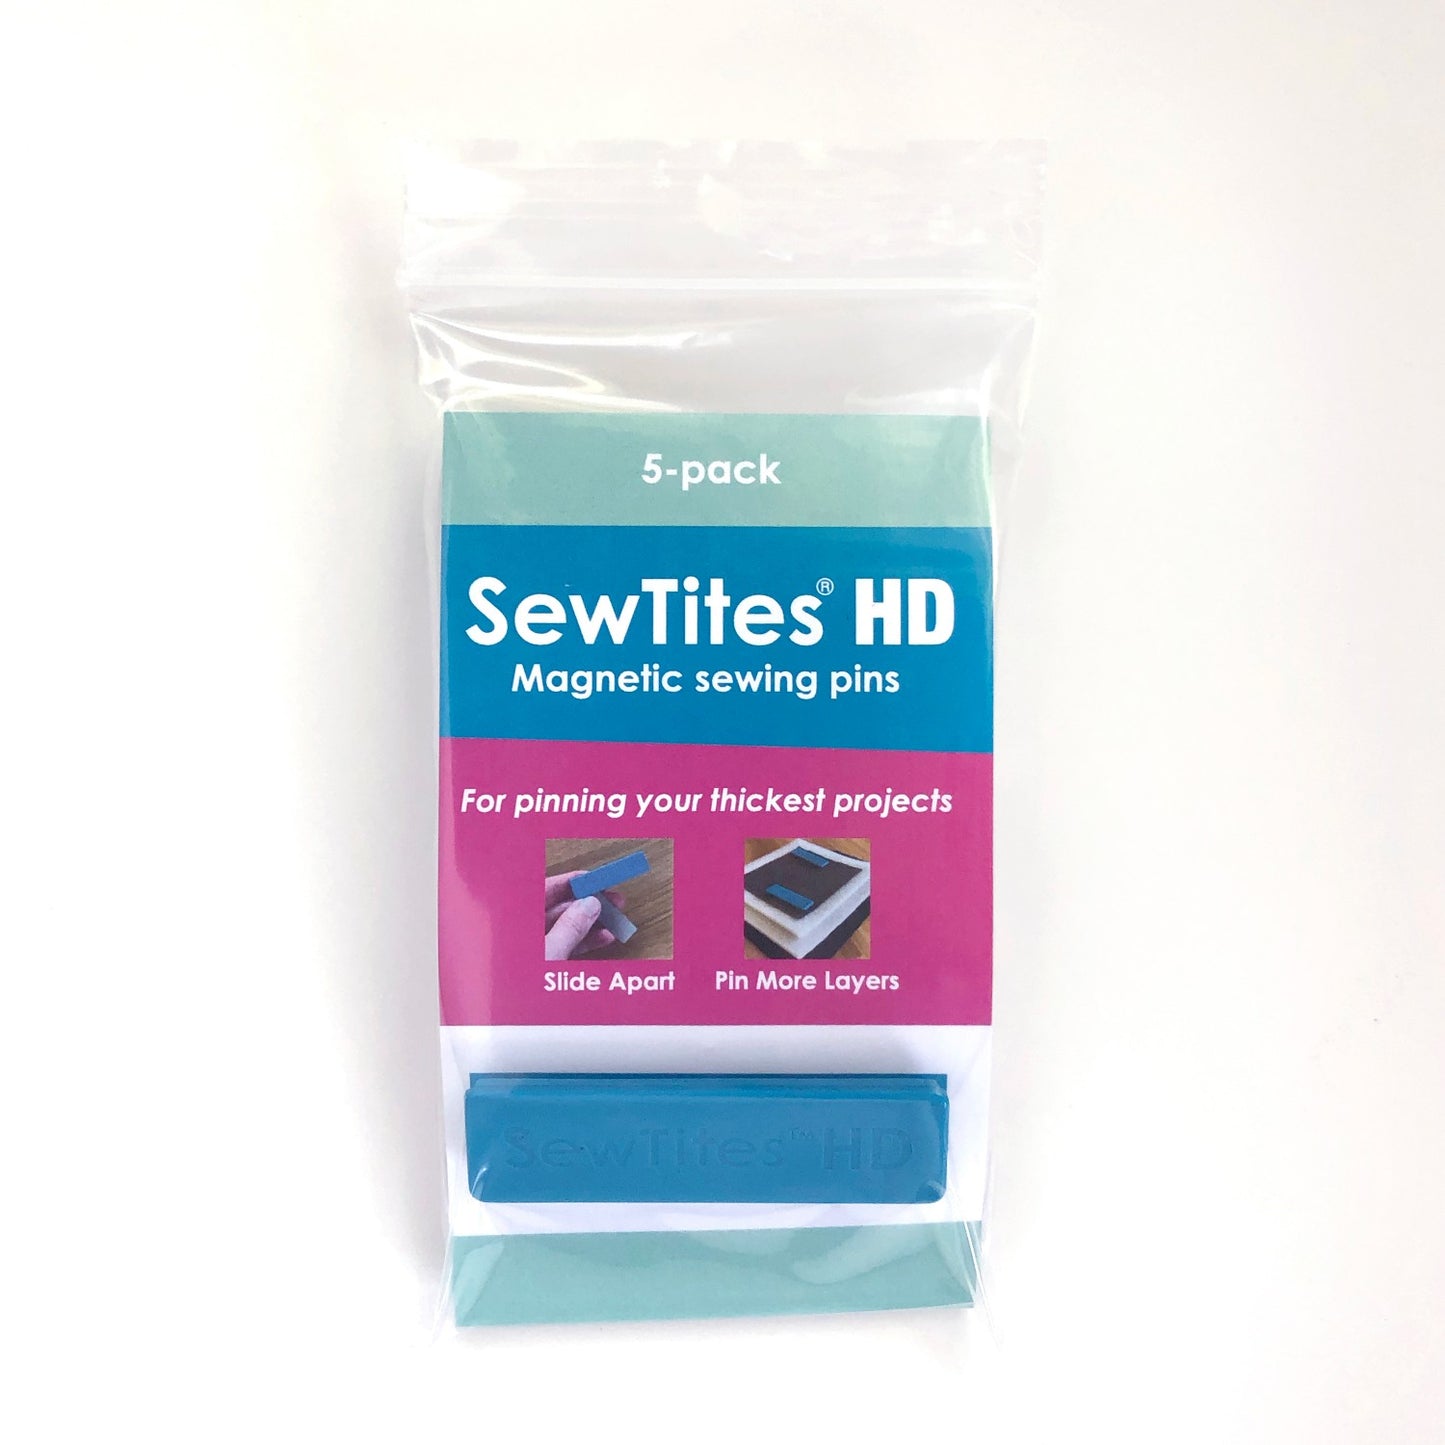 SewTites HDs are a magnetic pin for your thickest projects!  Even stronger and bigger than our original SewTites, these babies will do what you never thought possible! SewTites HD Dimensions: 2.125in x .5625in (54 x 14.5 mm).  Color: Blue Made of: Plastic and Metal Use: Magnetic Sewing pins Size: 2.125in x .5625in Included: 5 magnets per package